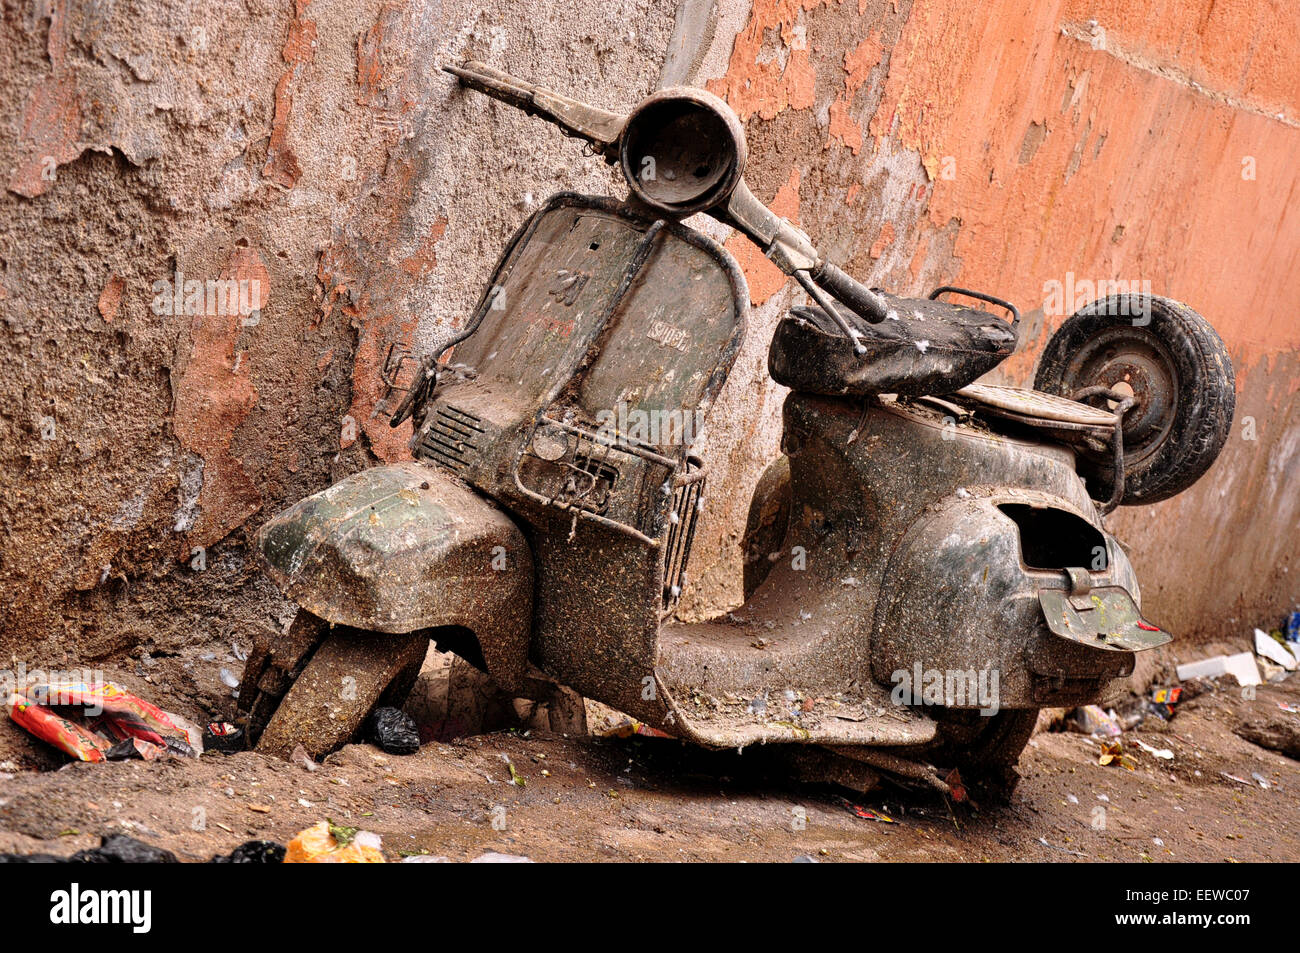 Old  rusty scooter motorbike  covered with pigeon droppings abandoned at a city sewer in Jodhpur, India Stock Photo